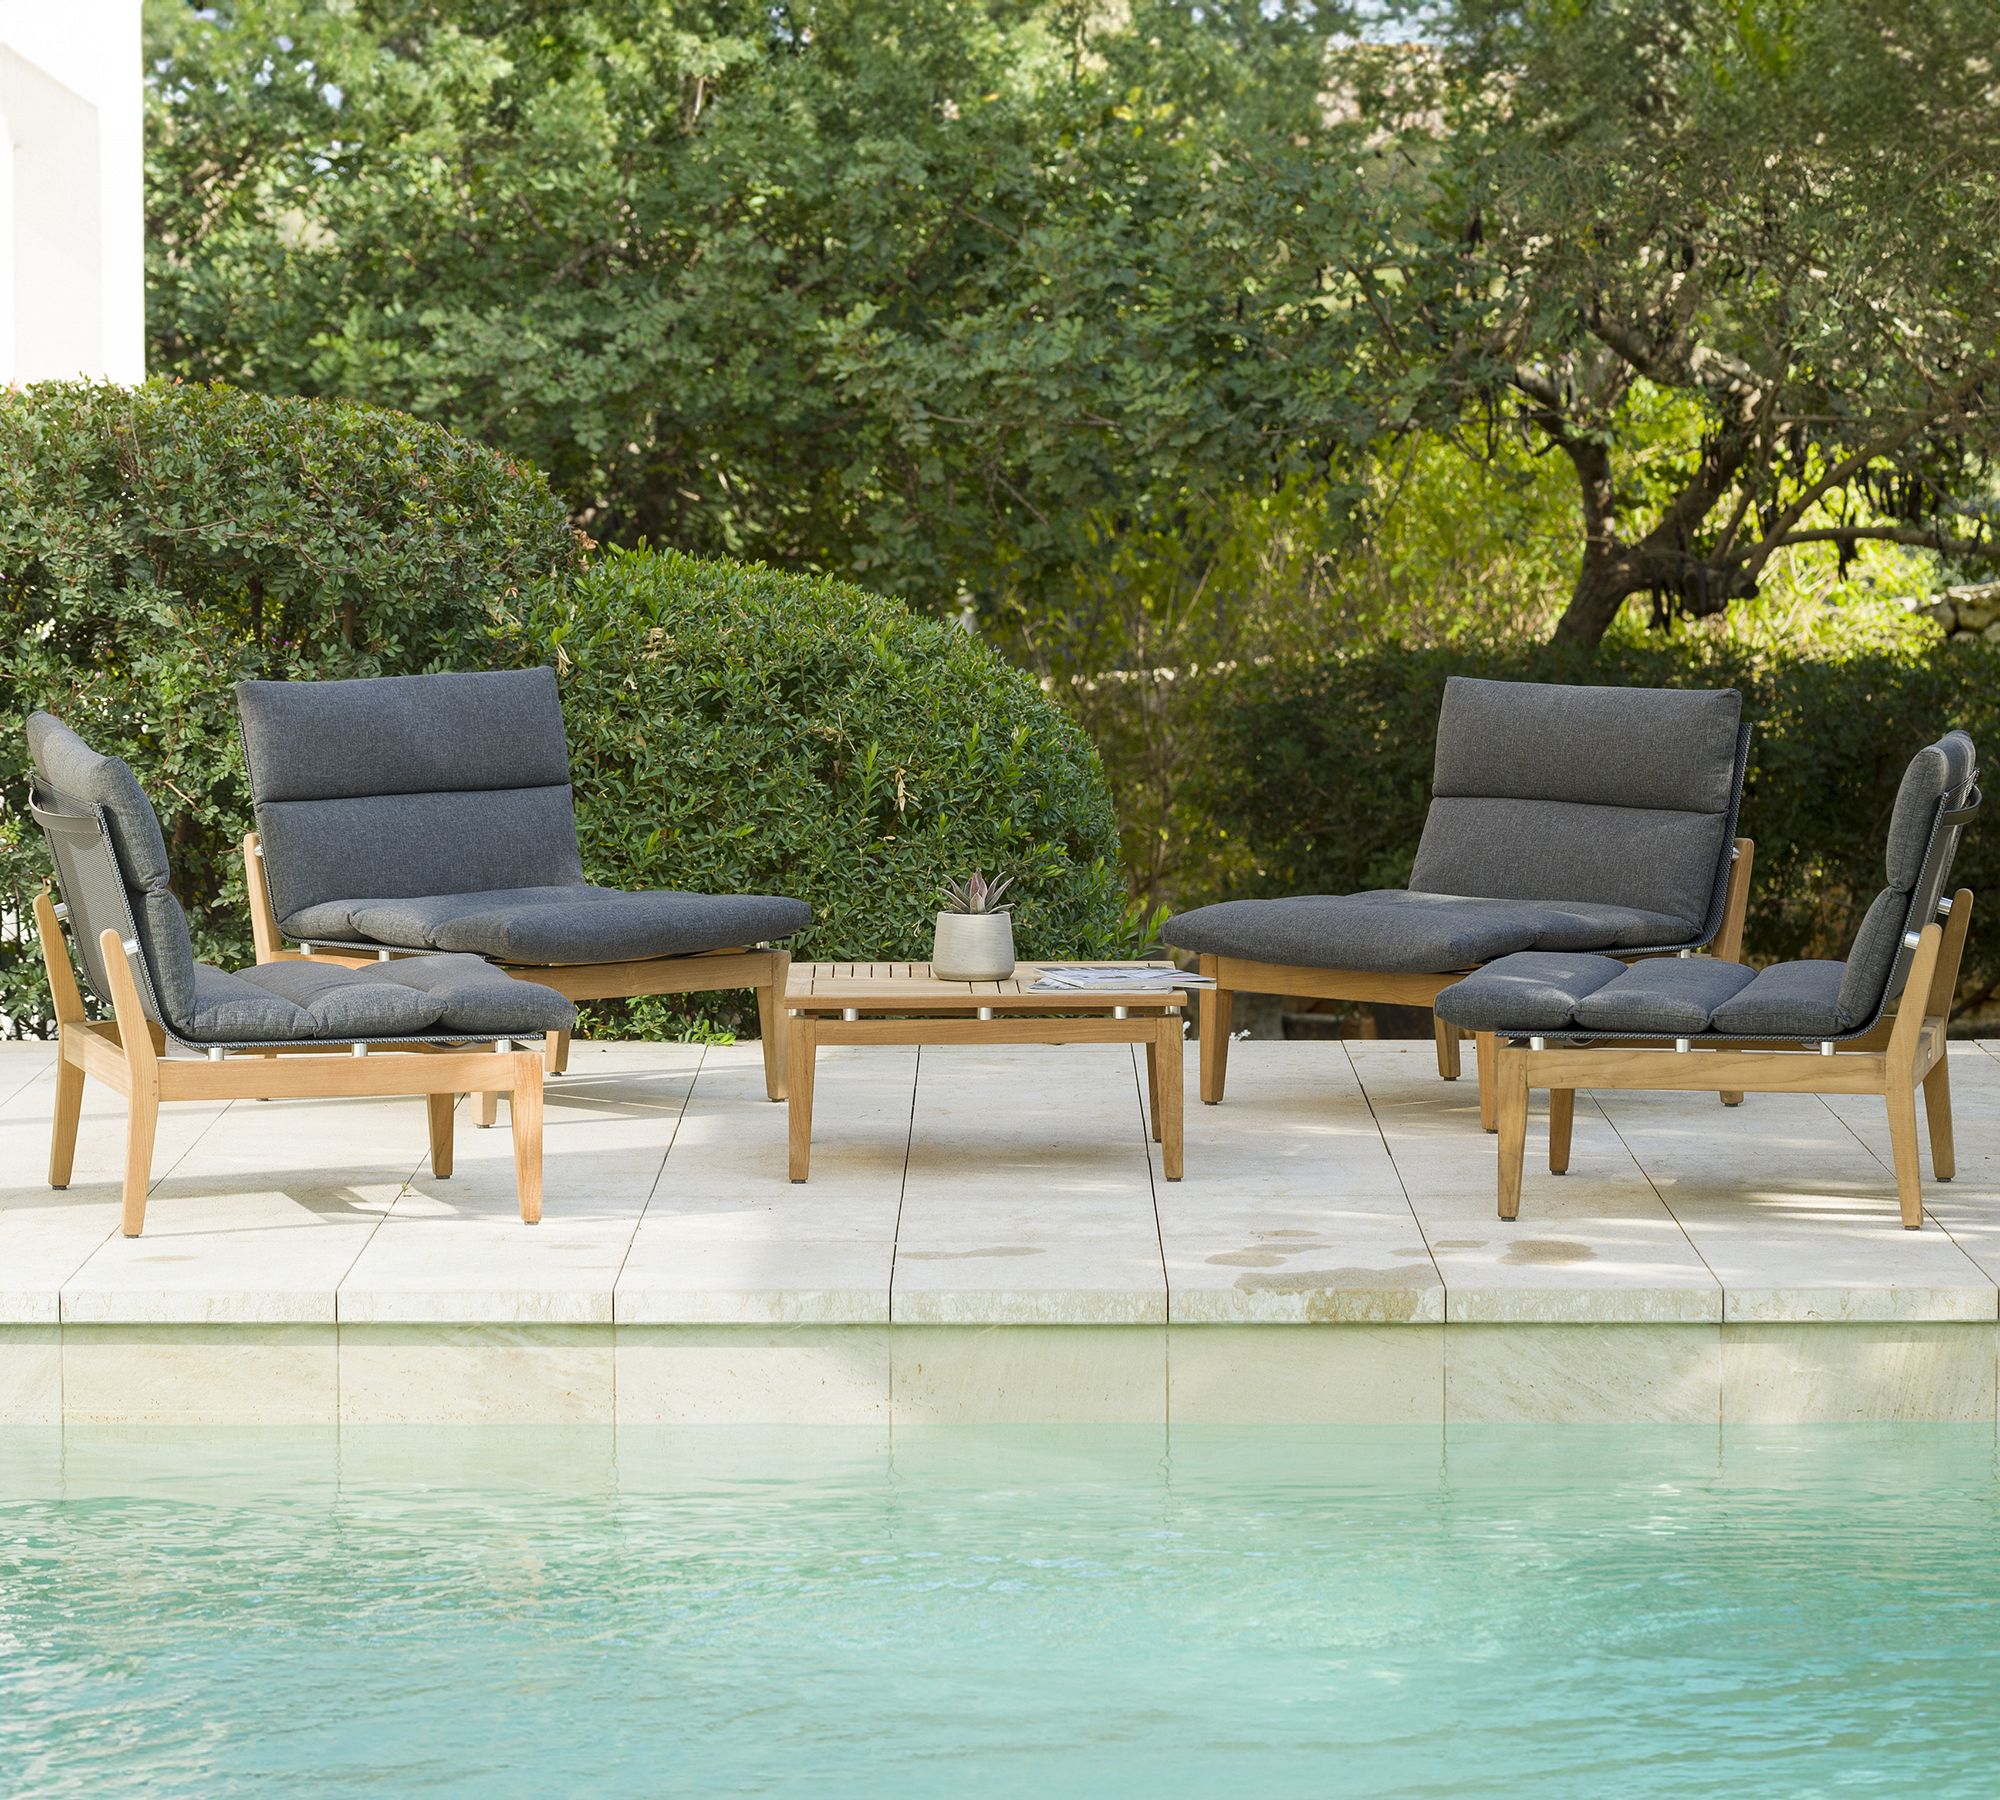 Miami Outdoor Teak -Piece Side Chair Seating Set with Coffee Table